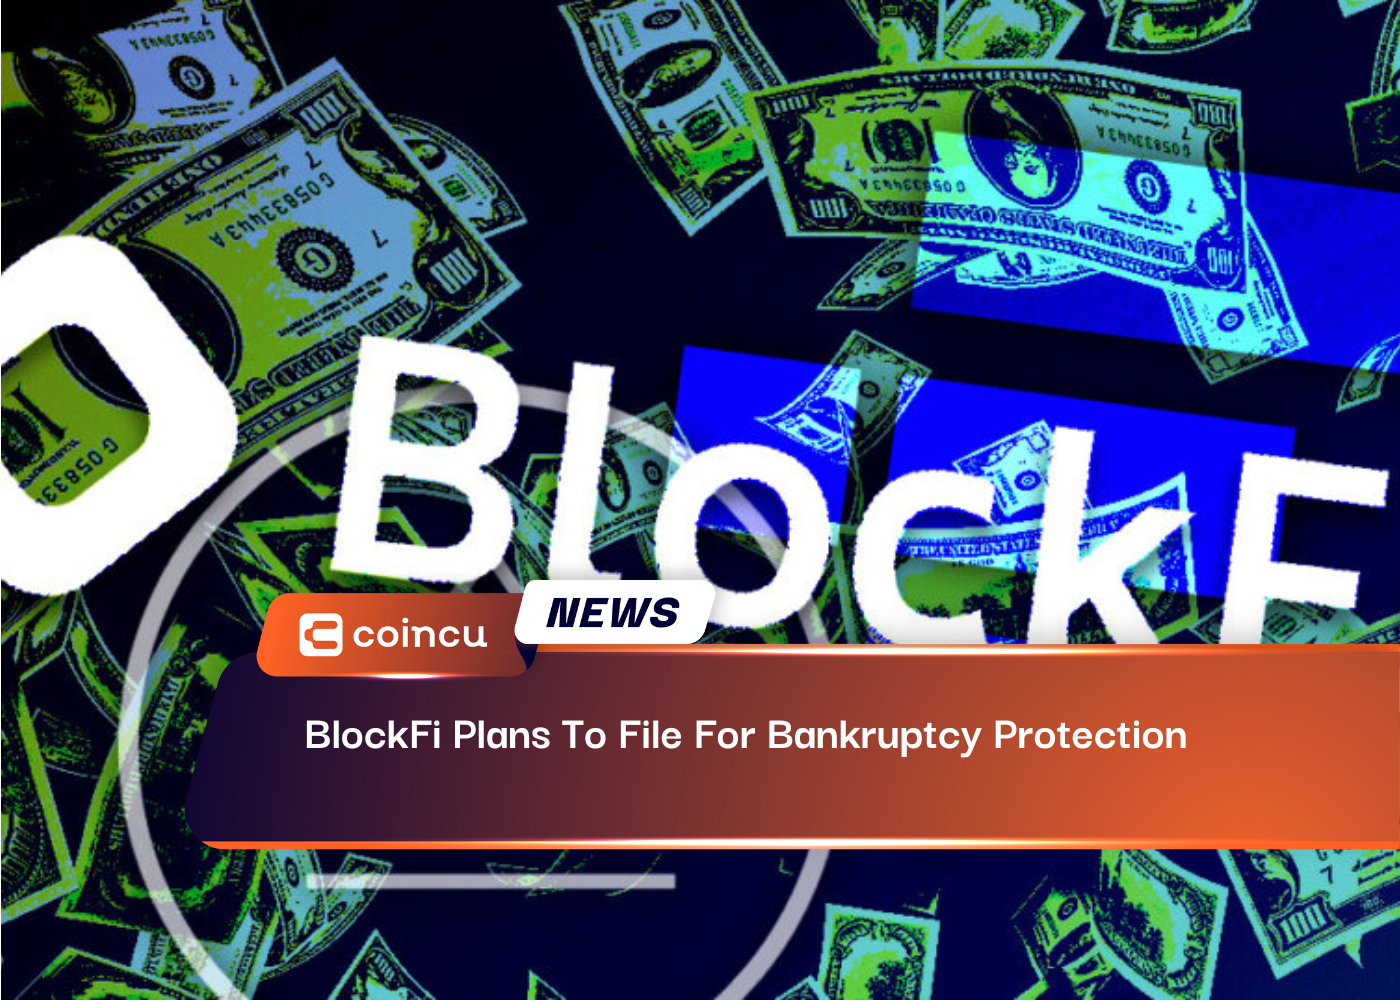 BlockFi Plans To File For Bankruptcy Protection